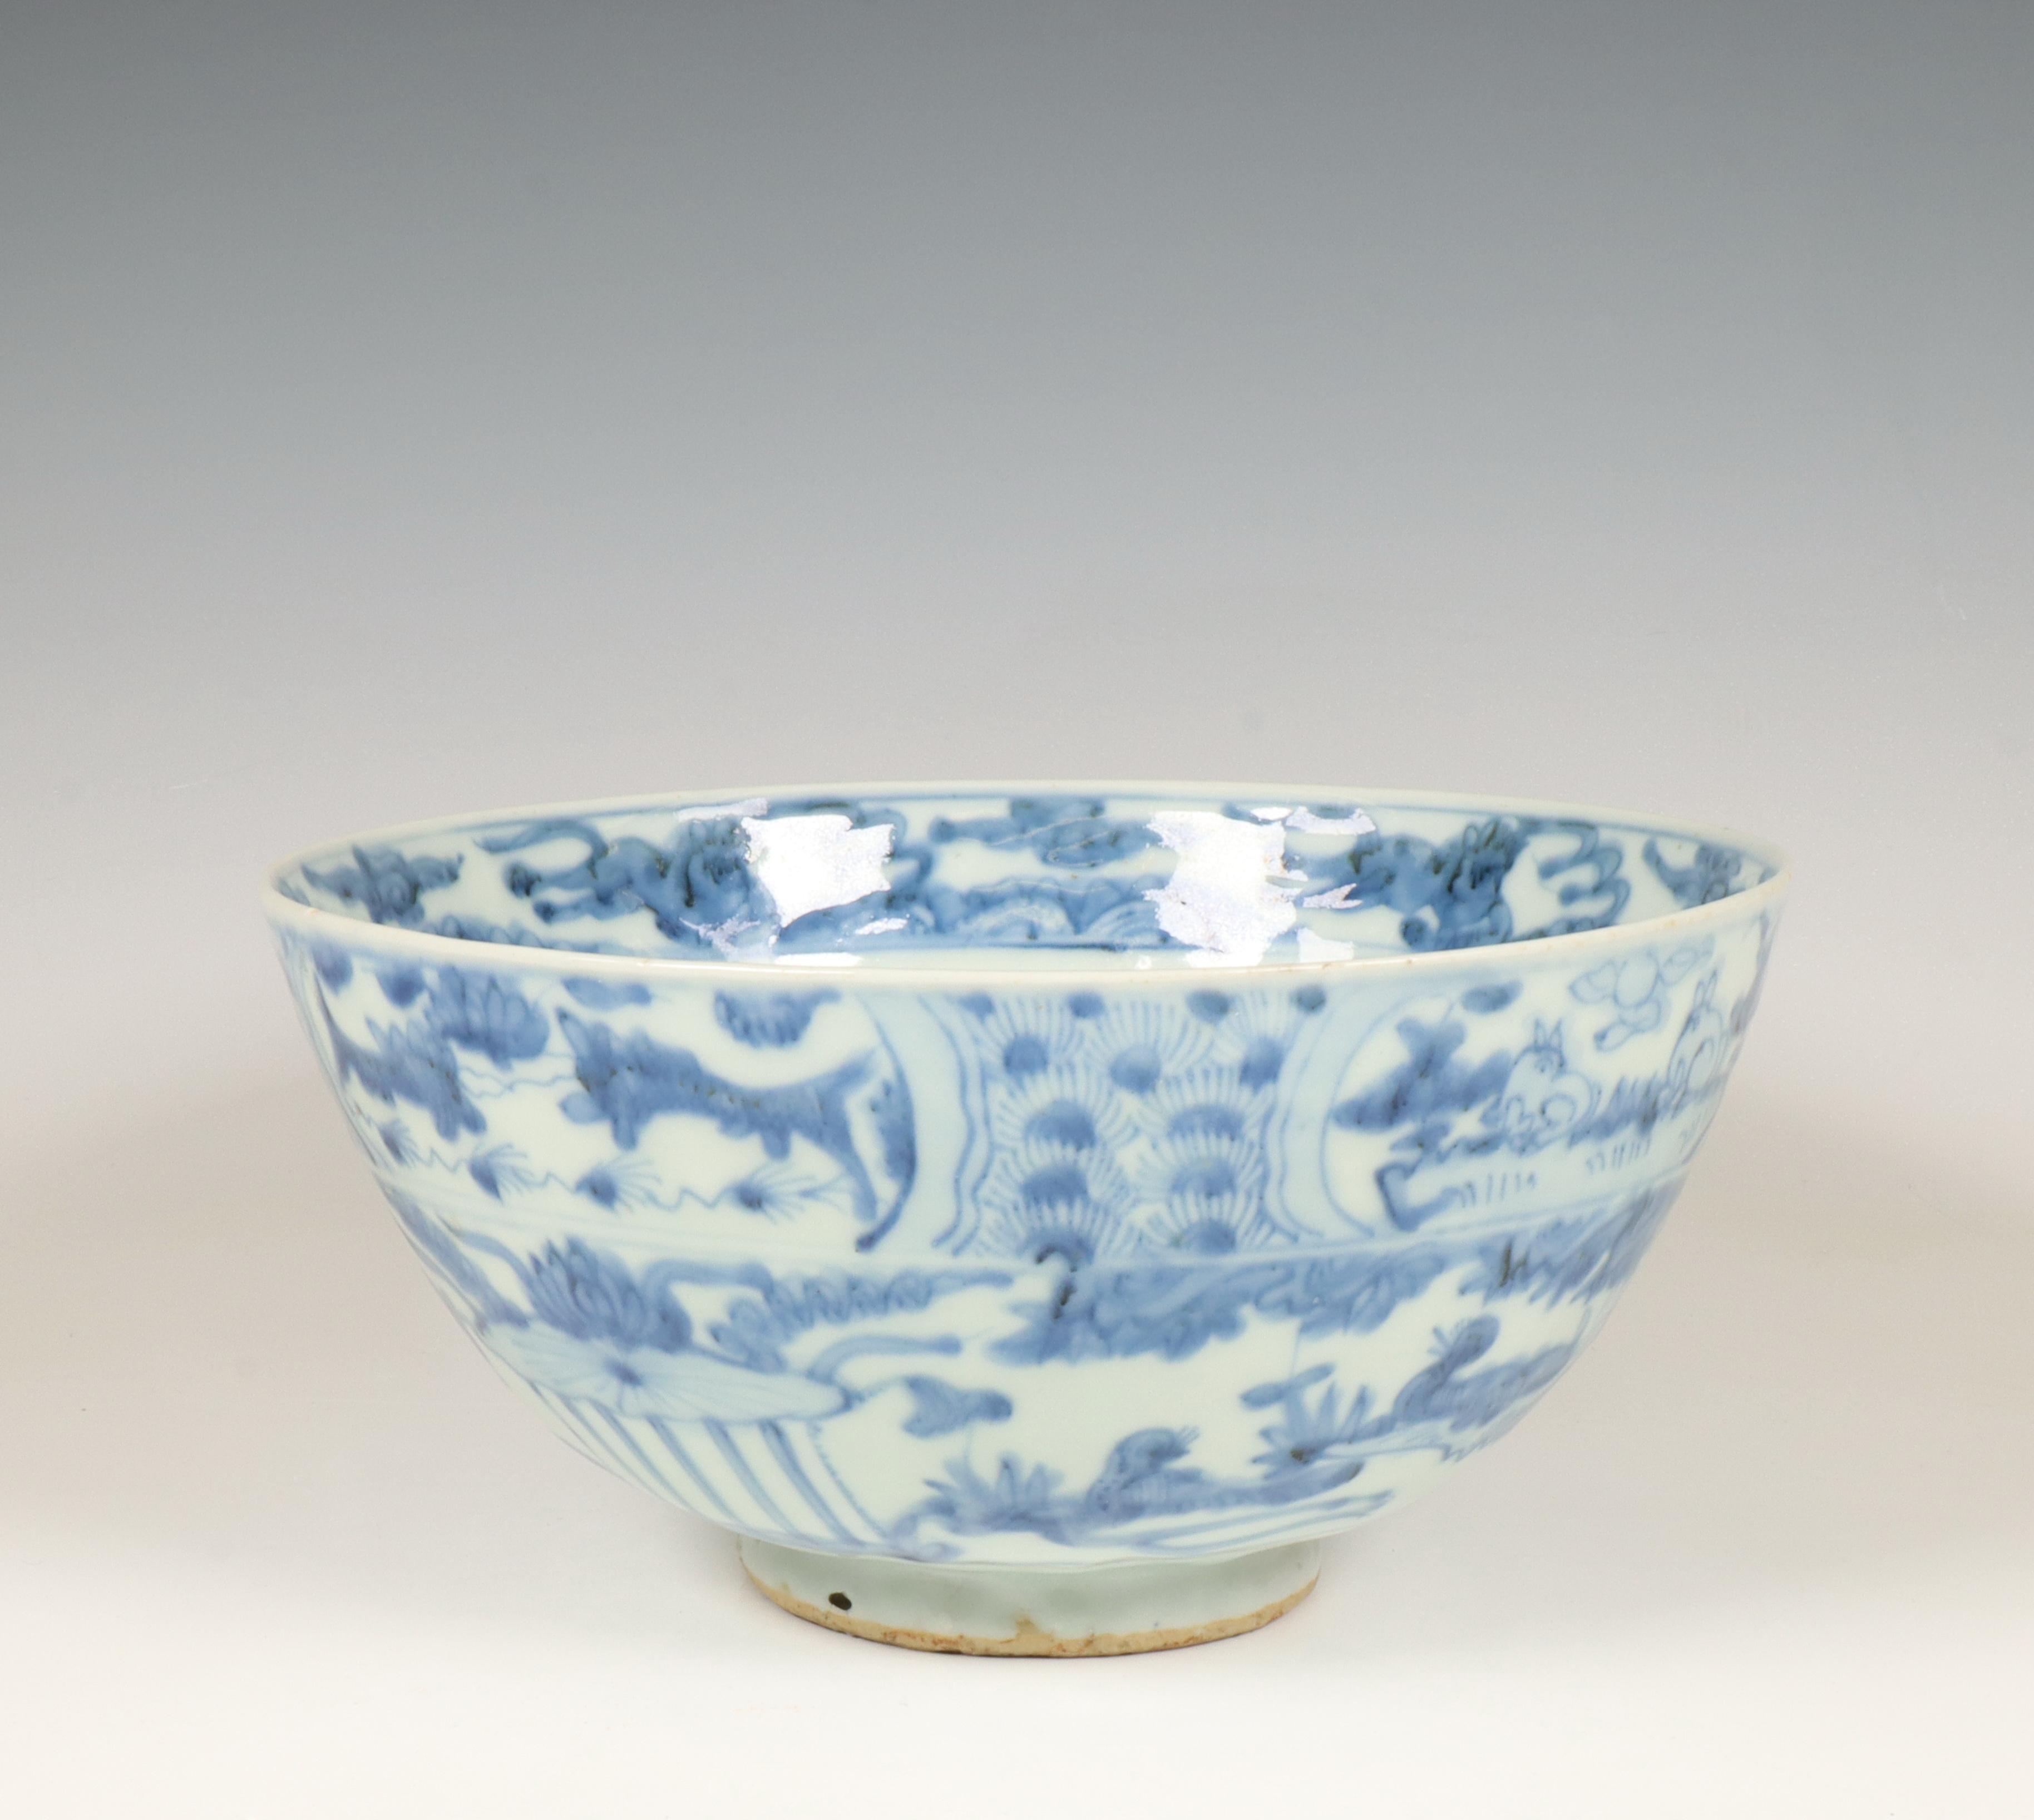 China, a blue and white porcelain bowl, late Ming dynasty (1368-1644), - Image 11 of 11